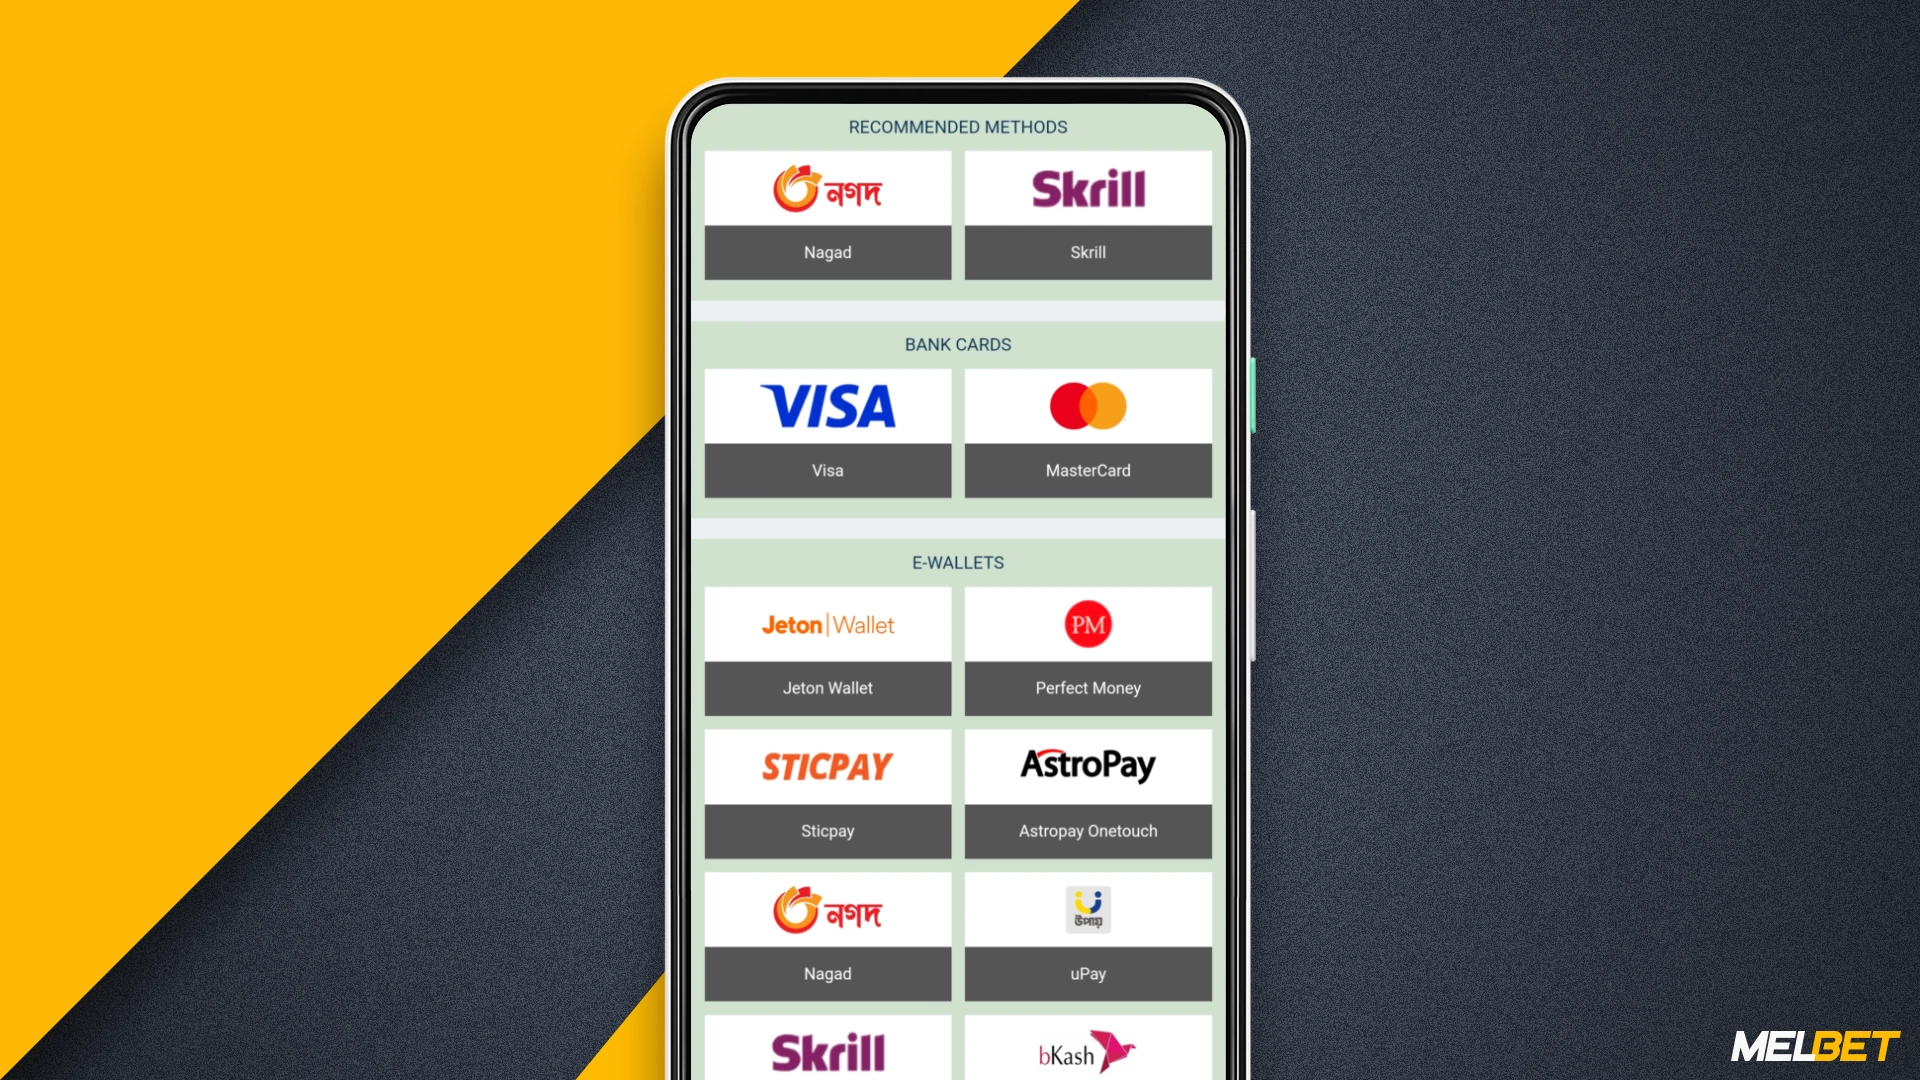 The Melbet mobile app has a wide range of payment systems that can be used to make deposits or withdrawals